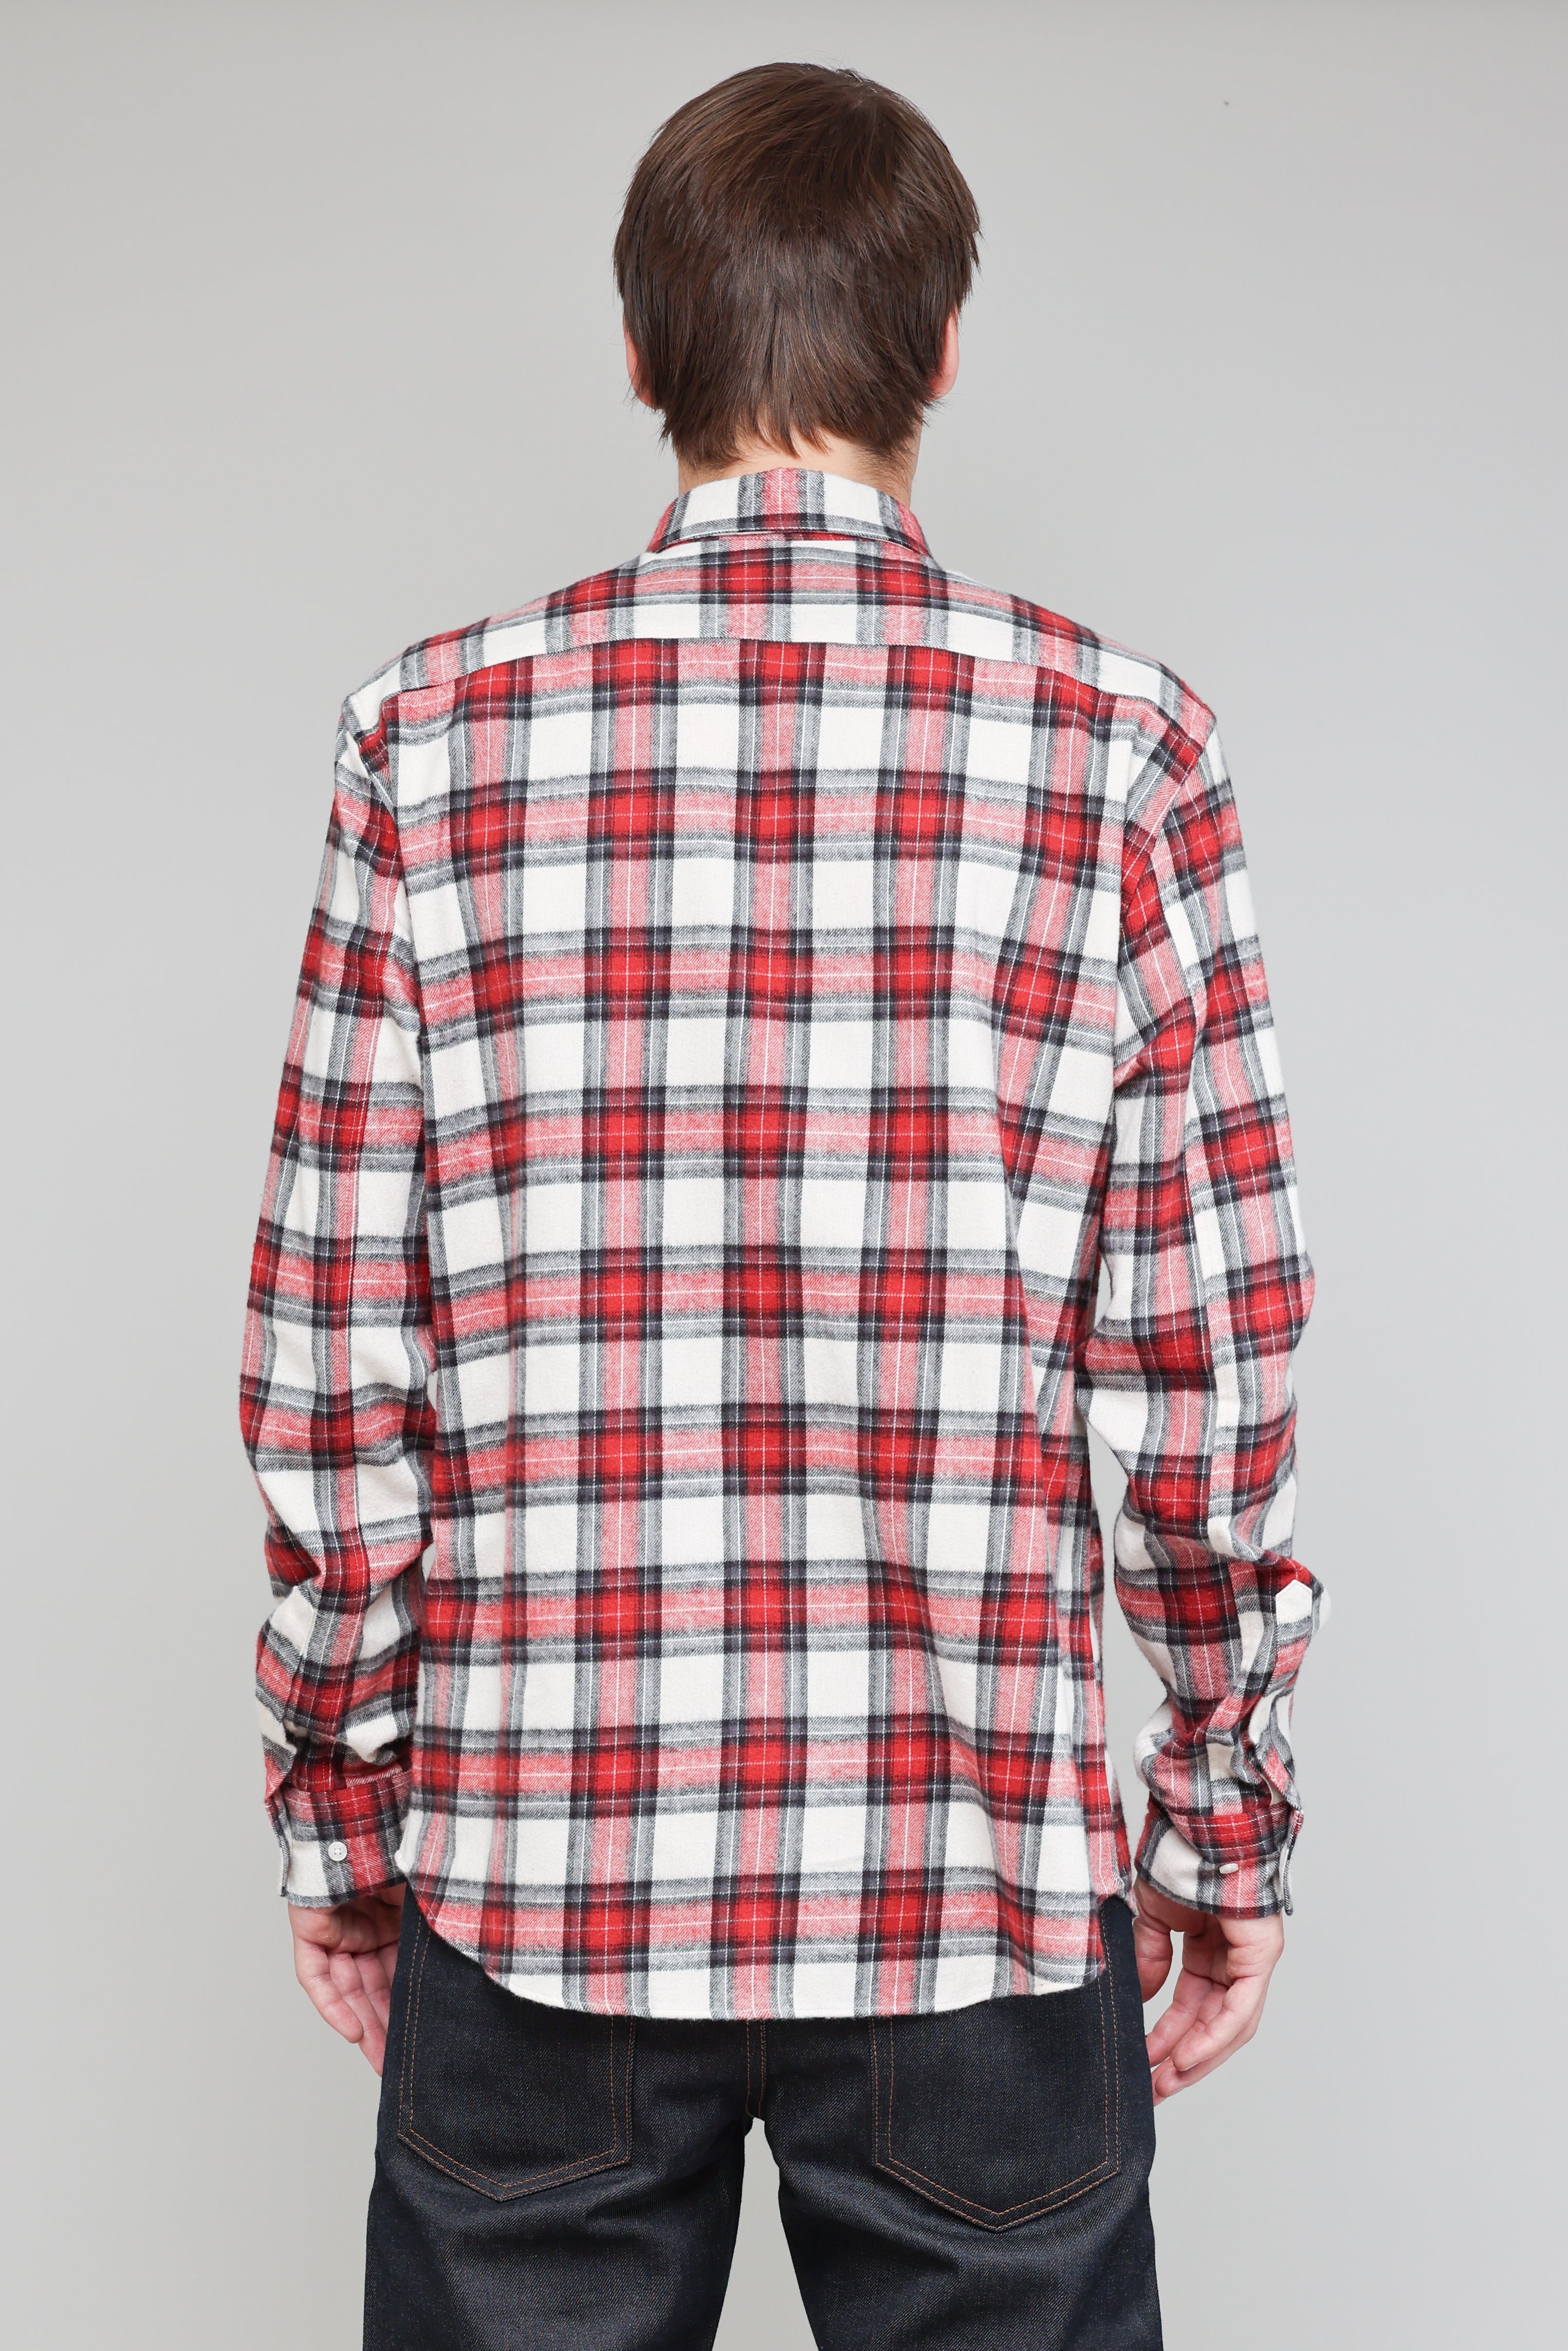 Japanese Shaggy Tartan in Red and Grey 03